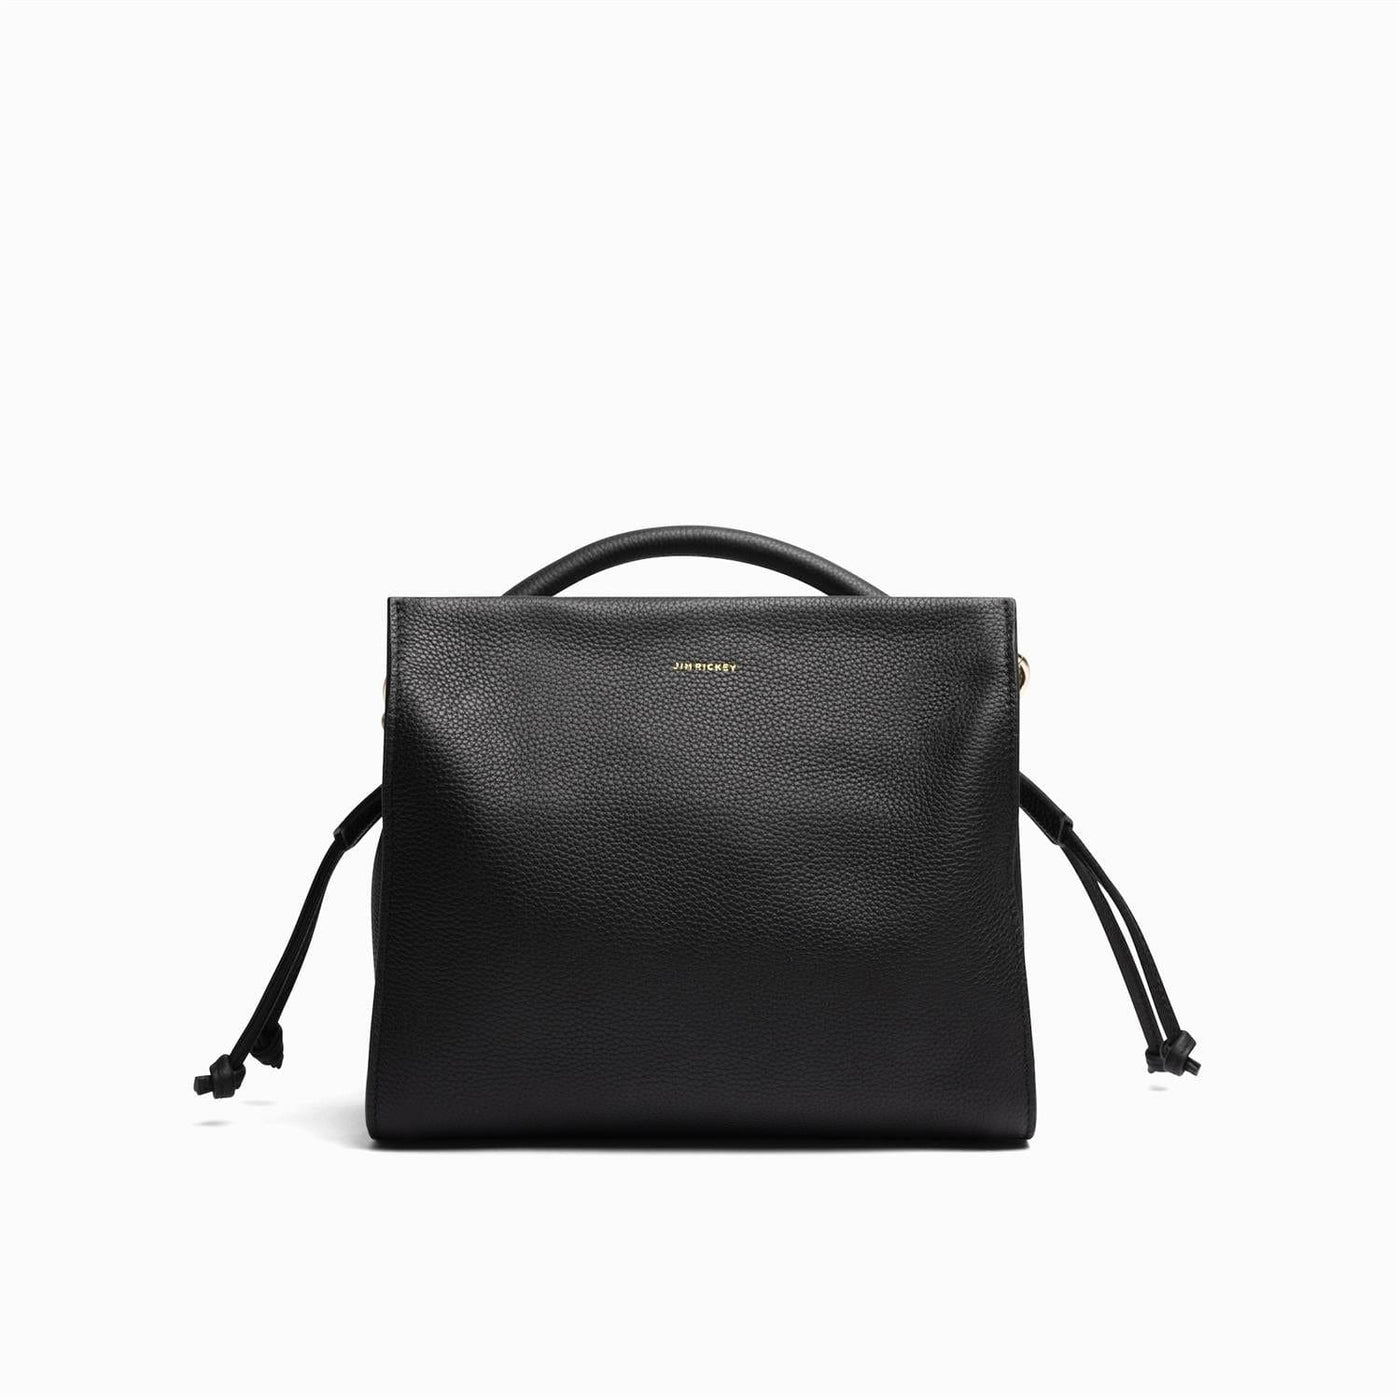 Bonnie Small Grained Leather Black